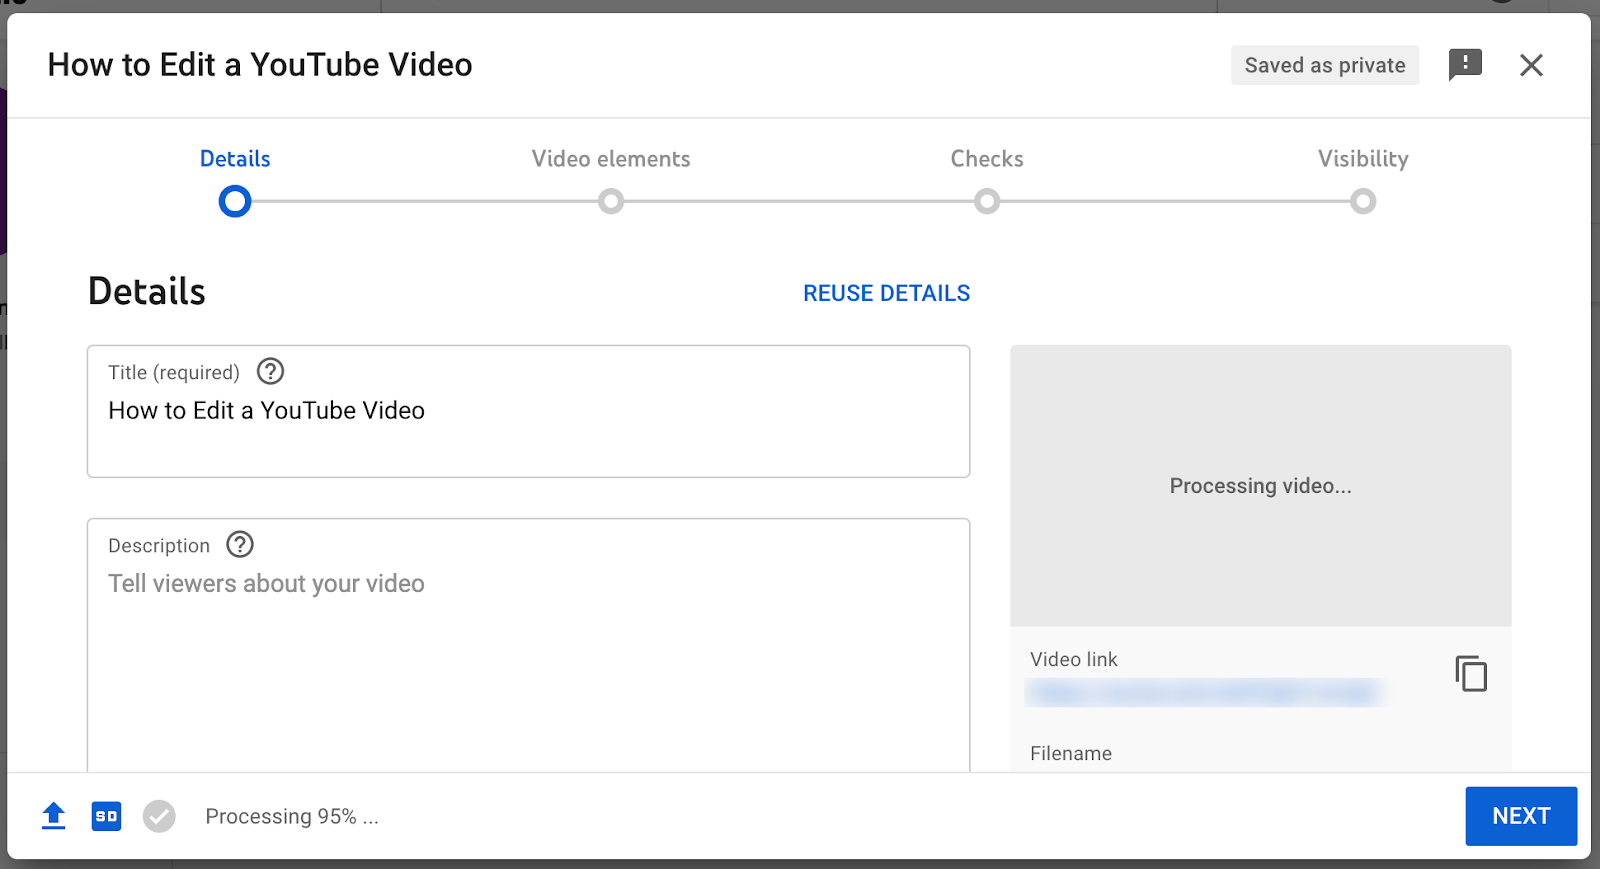 Adding details to a YouTube video.